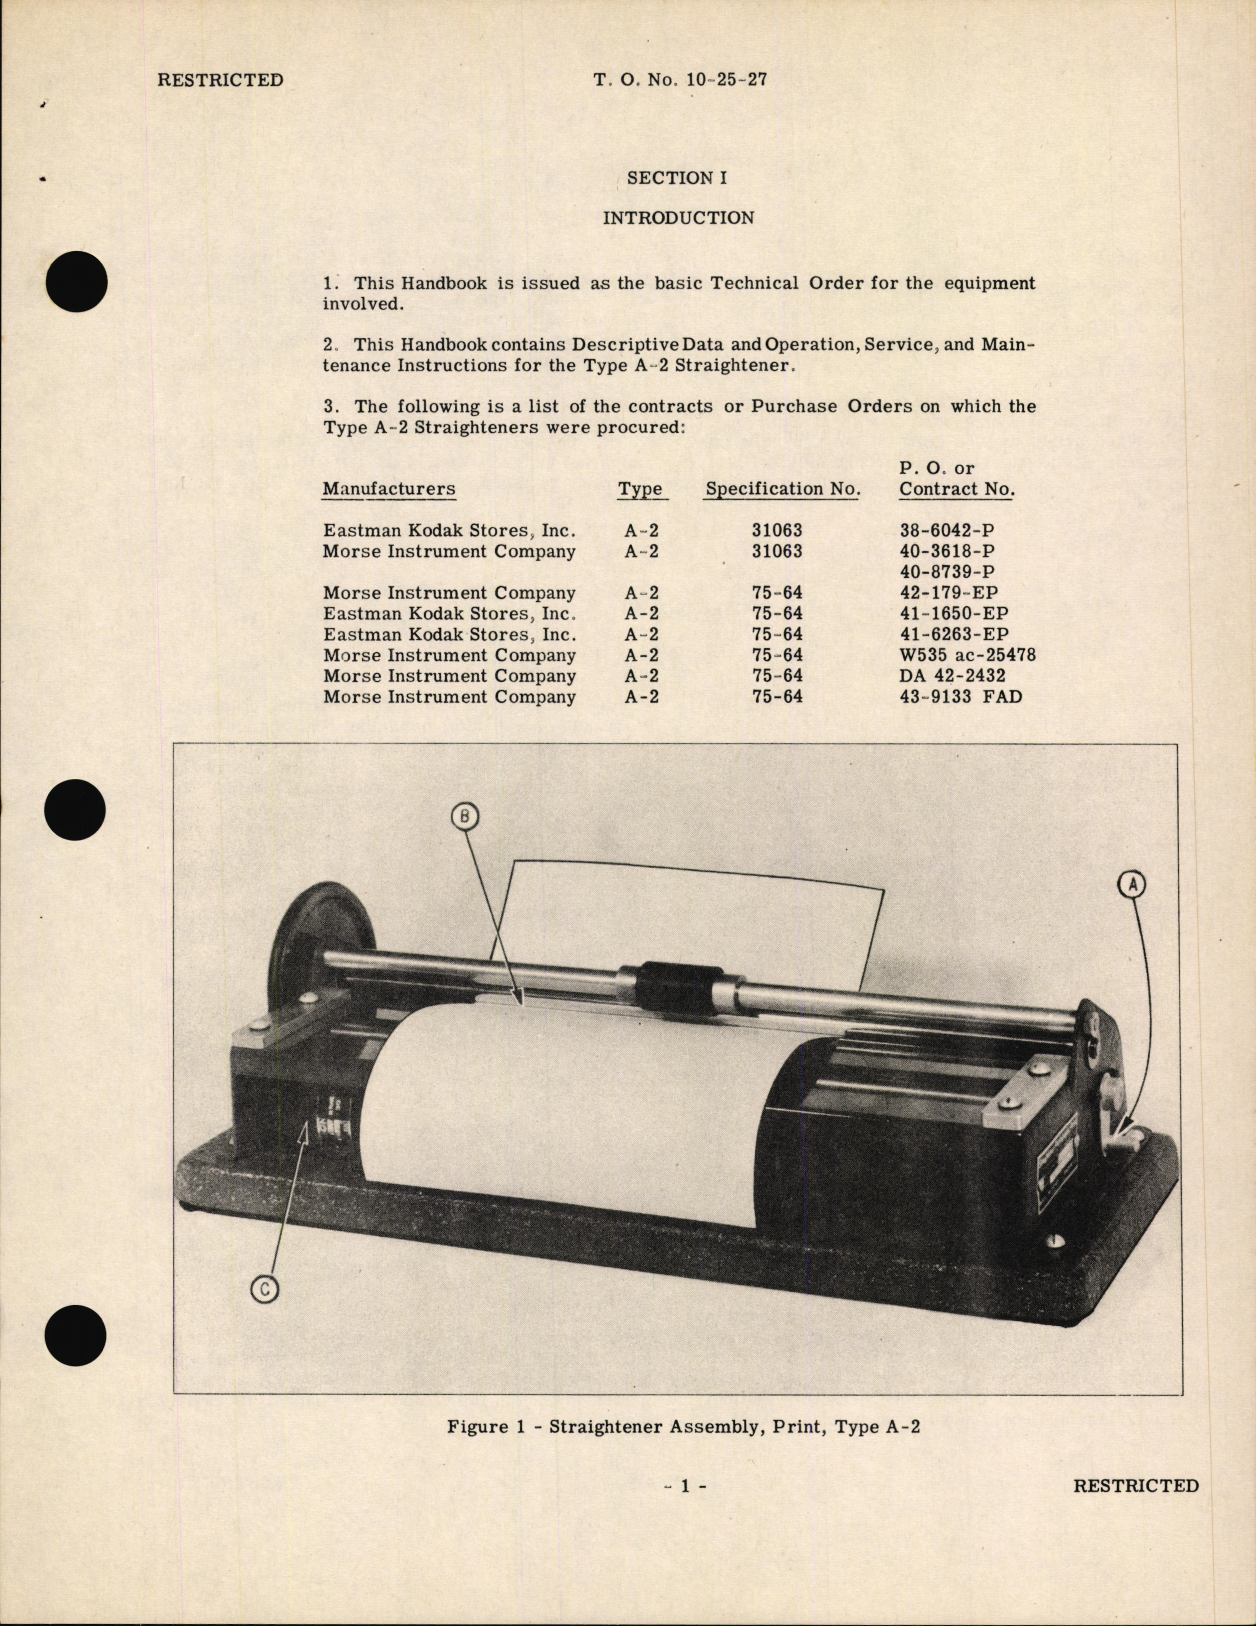 Sample page 5 from AirCorps Library document: Handbook of Instructions with Parts Catalog for Type A-2 Print Straightener